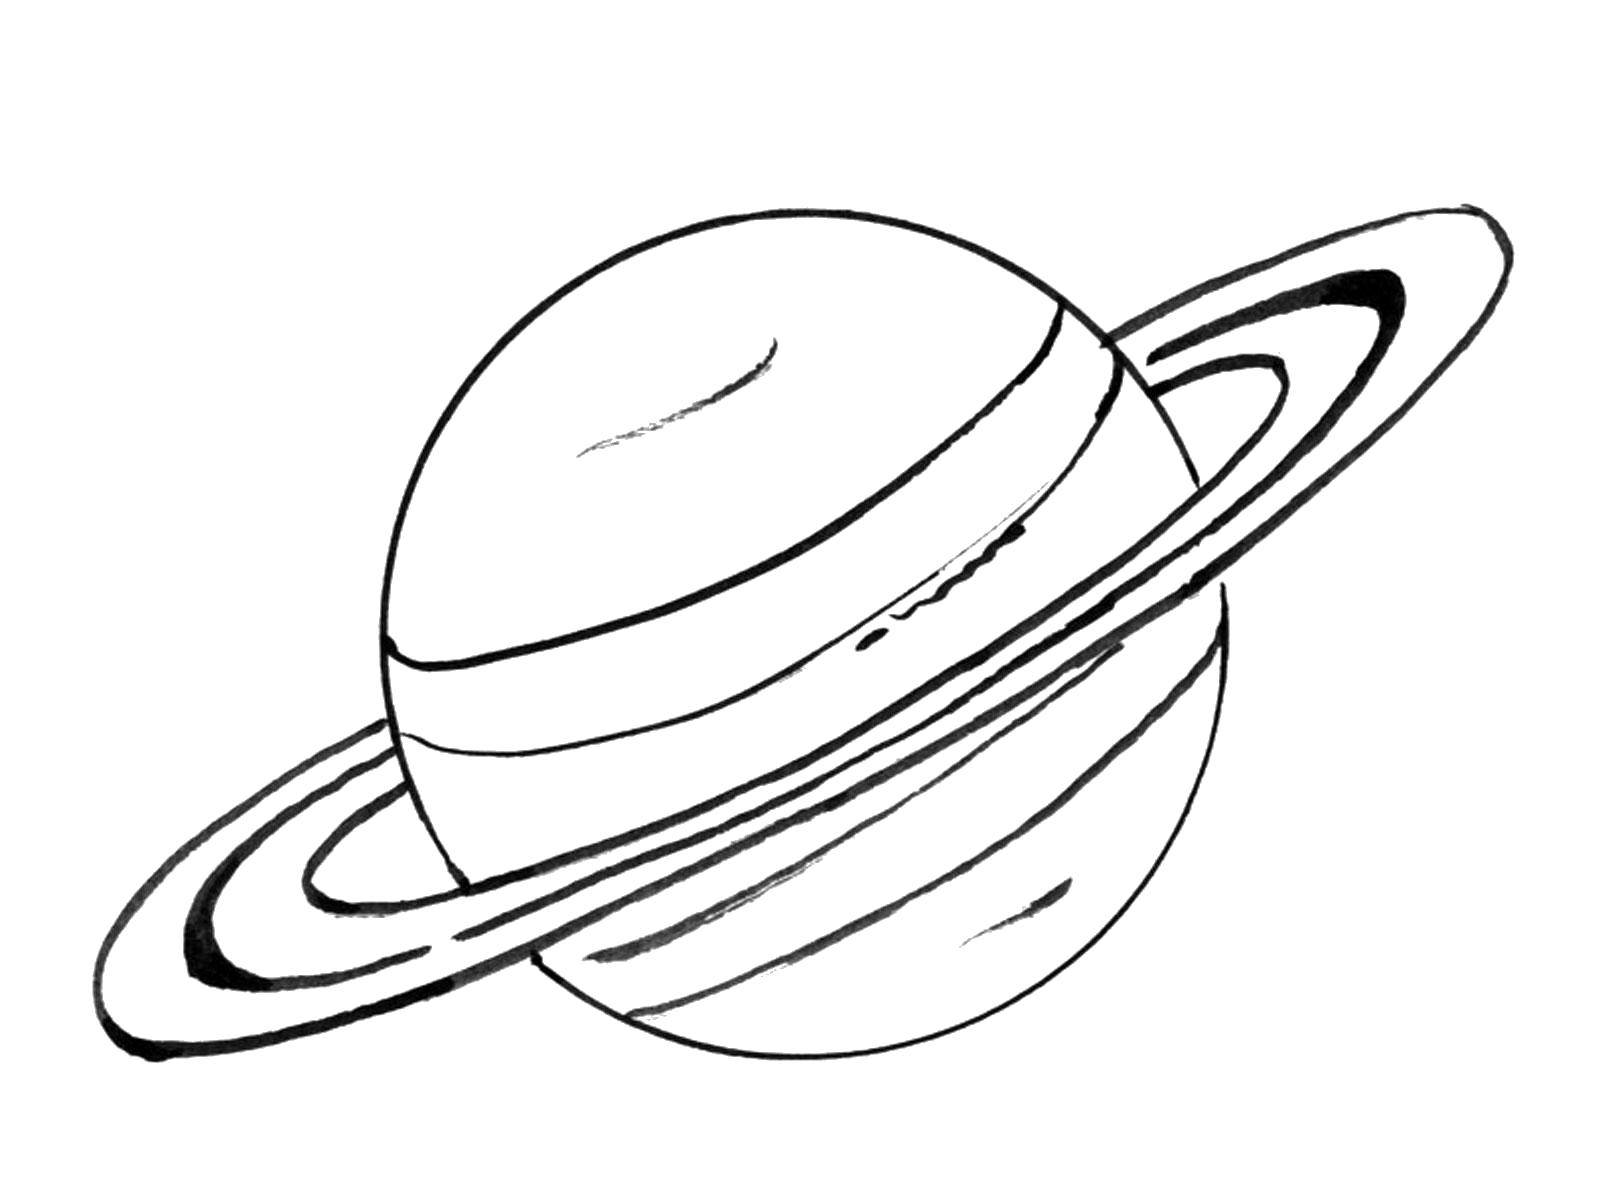 Coloring Saturn in space. Category space. Tags:  Space, planet, universe, Galaxy, Saturn.